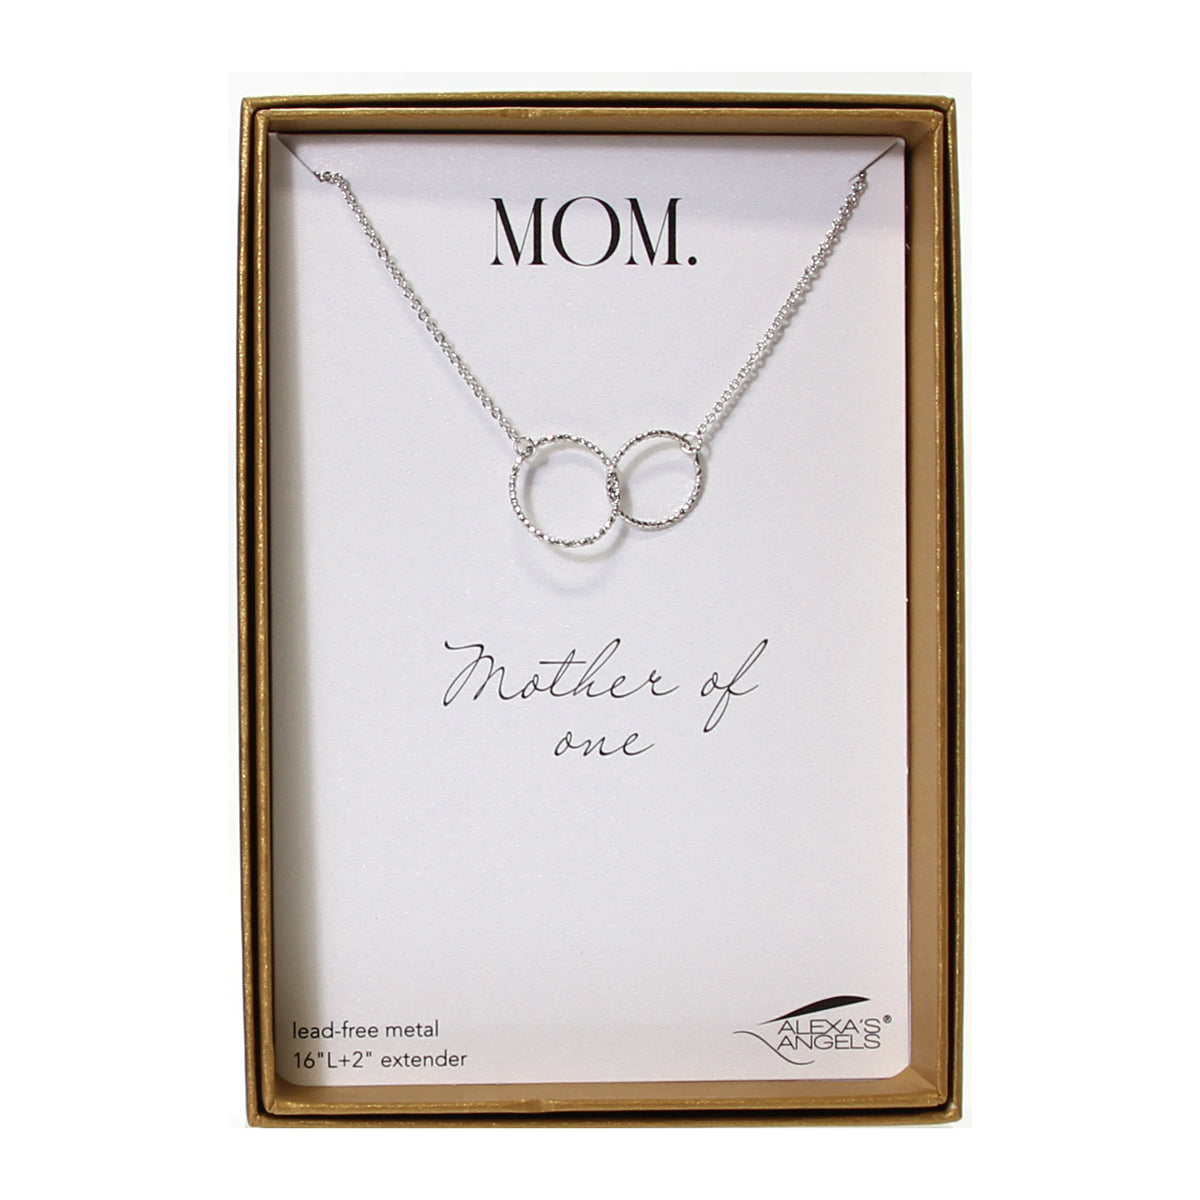 "Mother of " Silver Necklaces, Mom, 16" +2"